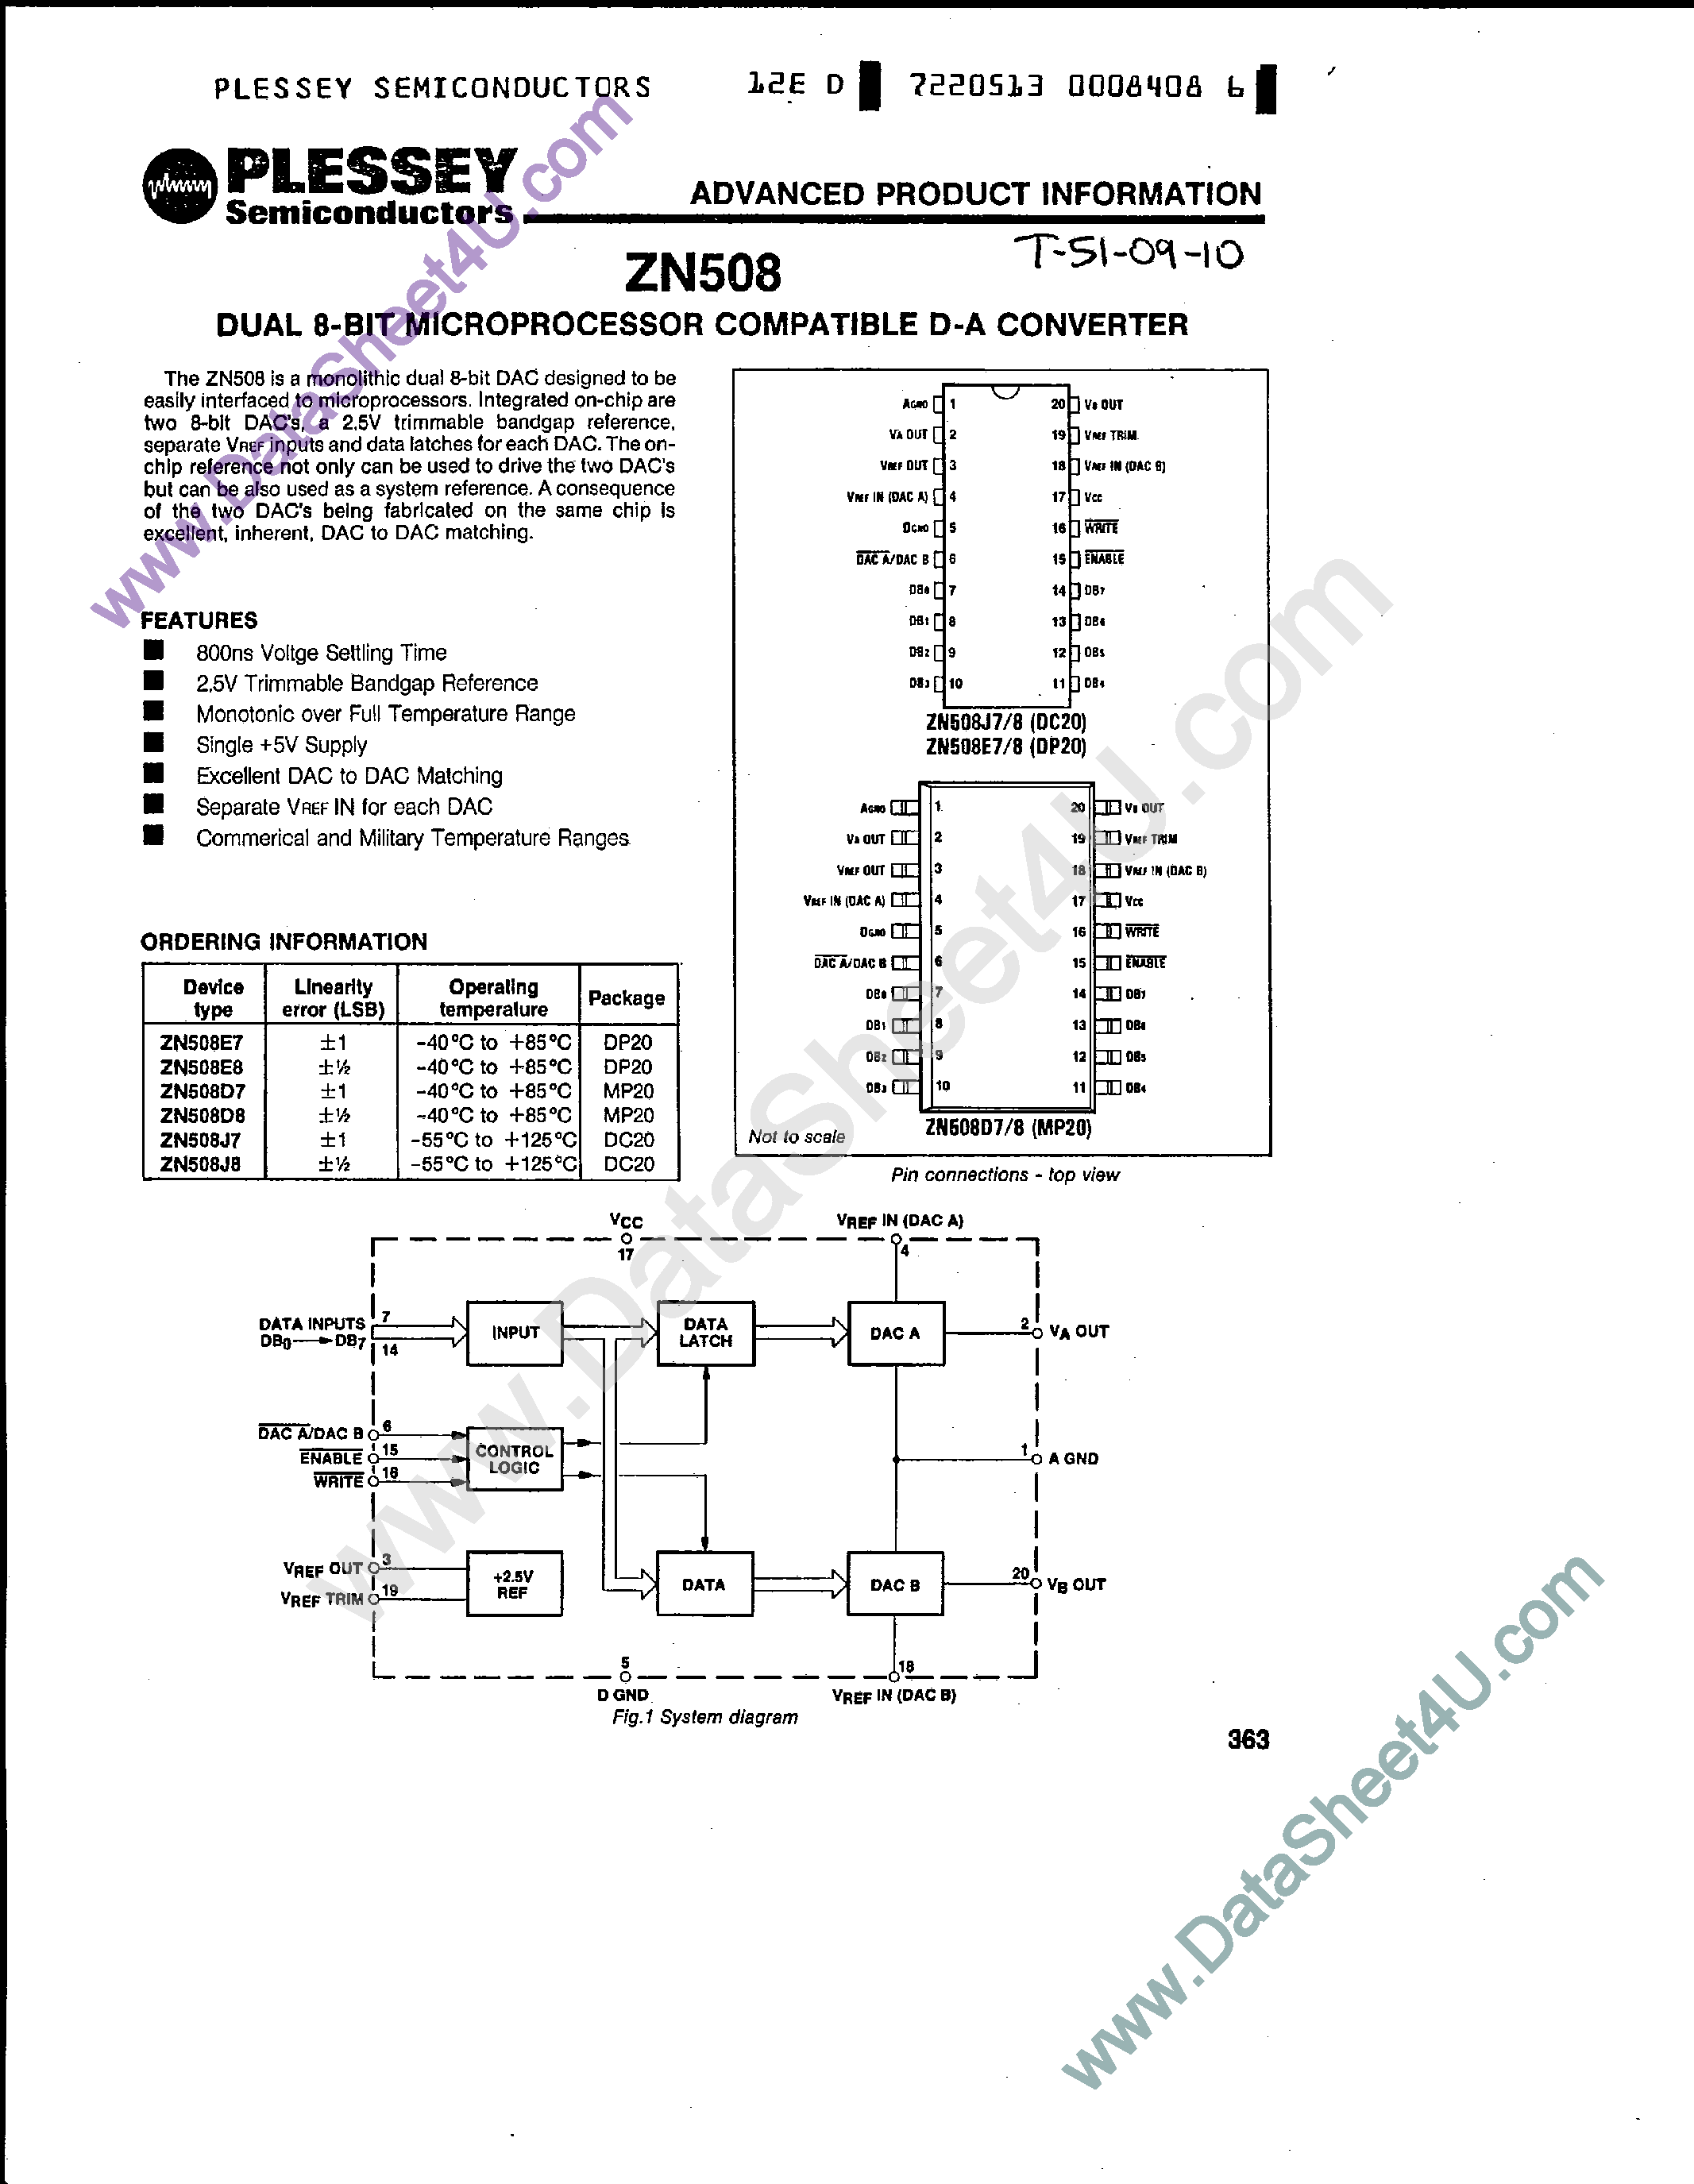 Datasheet ZN508 - Dual 8-Bit Microprocessor Compatiable D-A Converter page 1